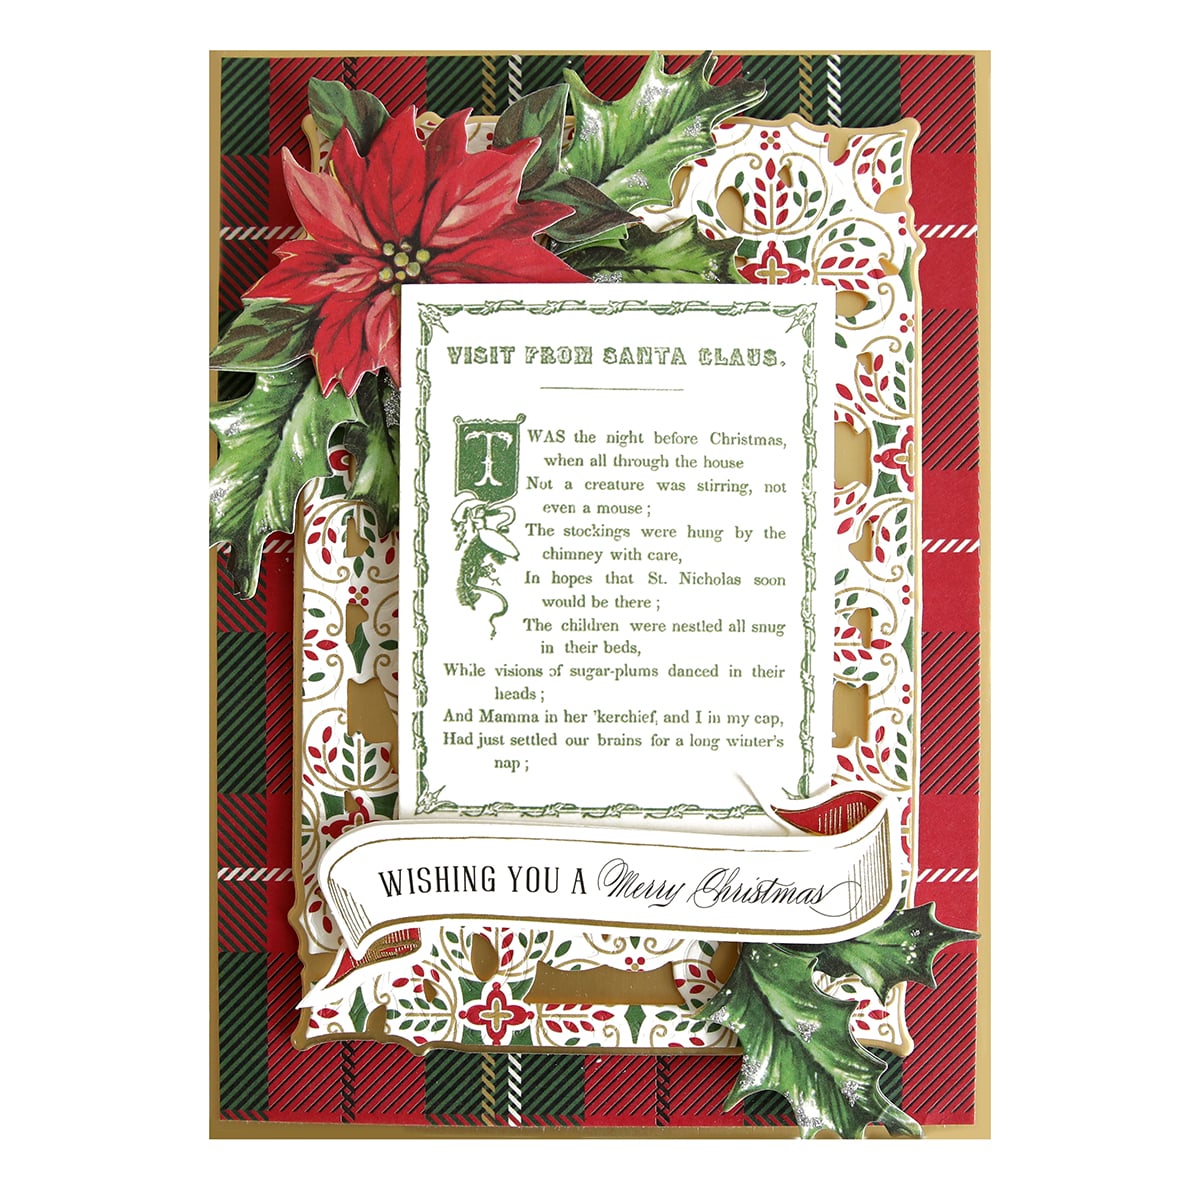 a christmas card with a poem and poinsettis.